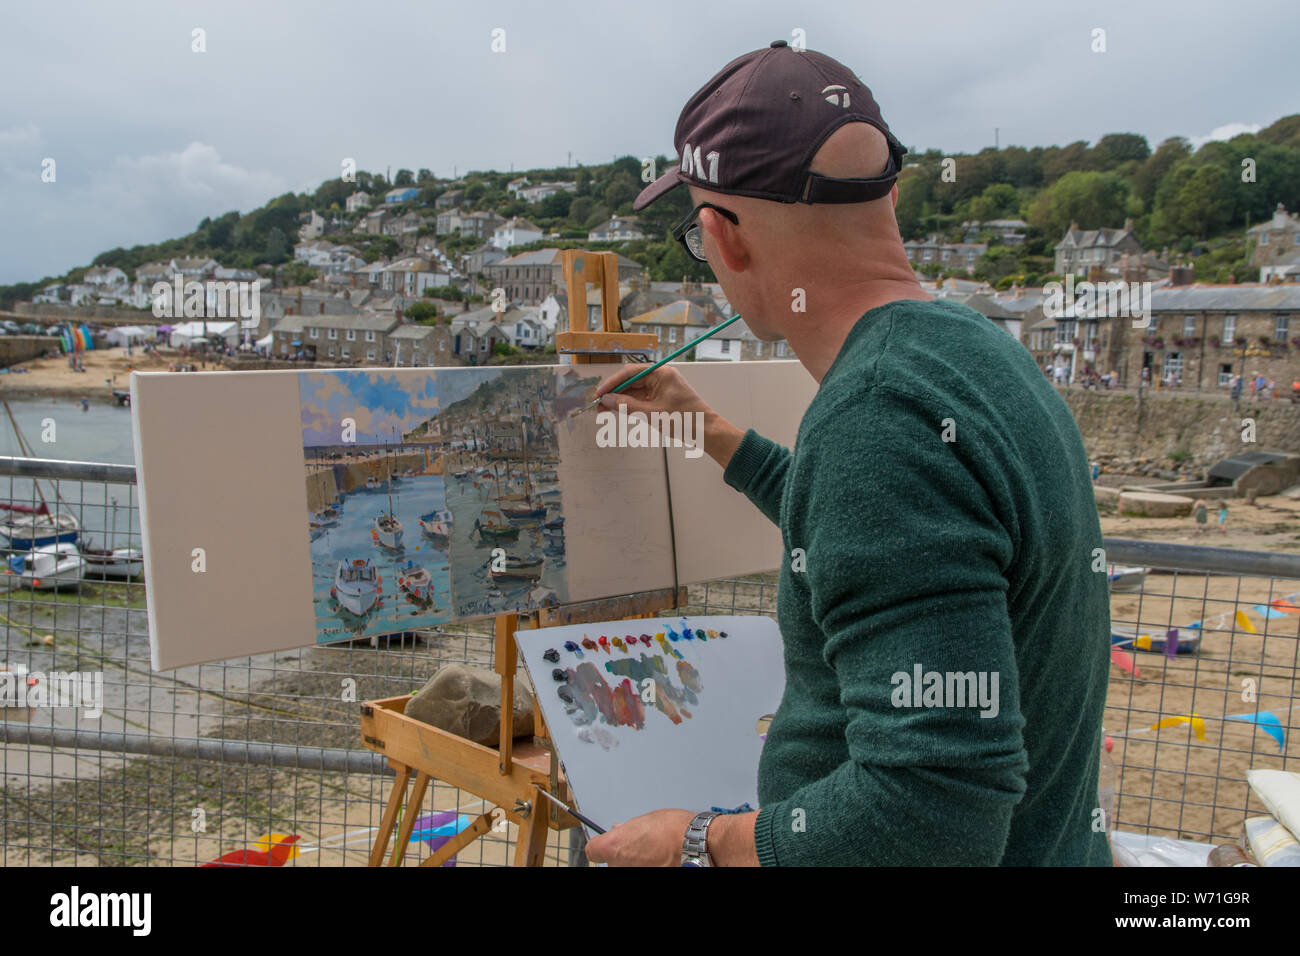 Mousehole, Cornwall, UK. 4th August 2019. Seen here Tim Hall, a former winner of the Sea Pictures Gallery Award by Royal society of Marine Artists, painting his section of a panorama of Mousehole harbour and village. the picture will be auctioned off later to raise funds for the annual festival. The other artists painting are Roger Curtis, Lizzie Black, Tom Rickman, Jeremy Sanders, Judy Joel and finally Nigel Hallard. Credit Simon Maycock / Alamy Live News. Stock Photo